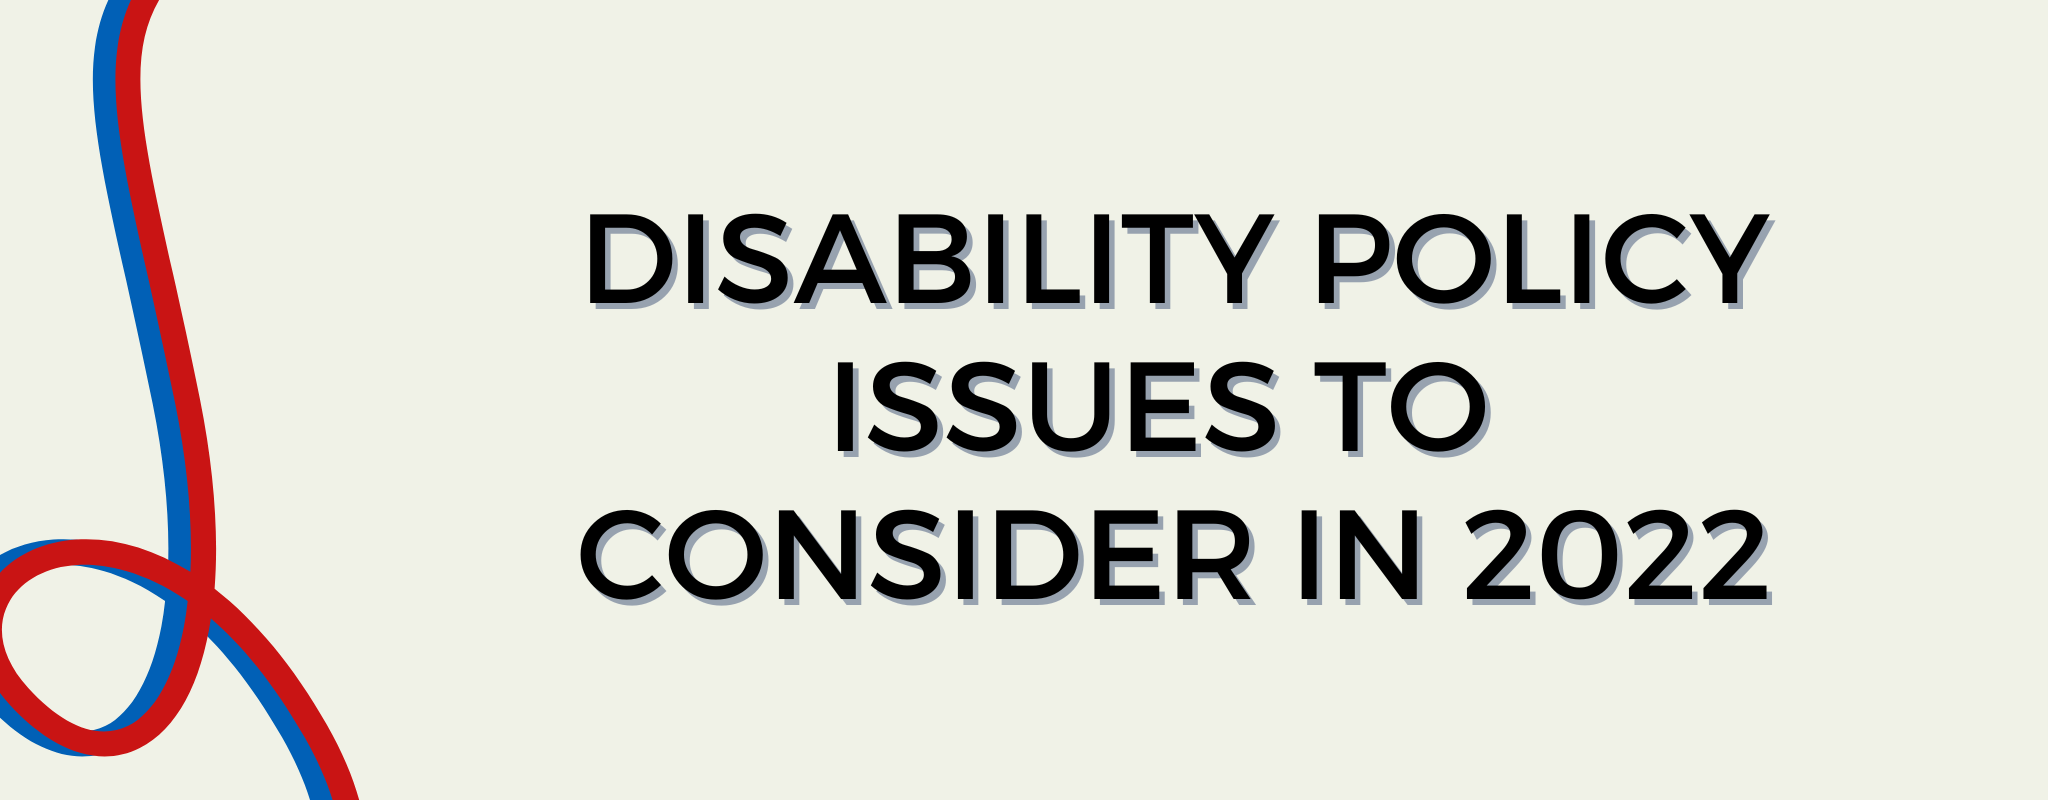 Disability Policy Issues to Consider in 2022